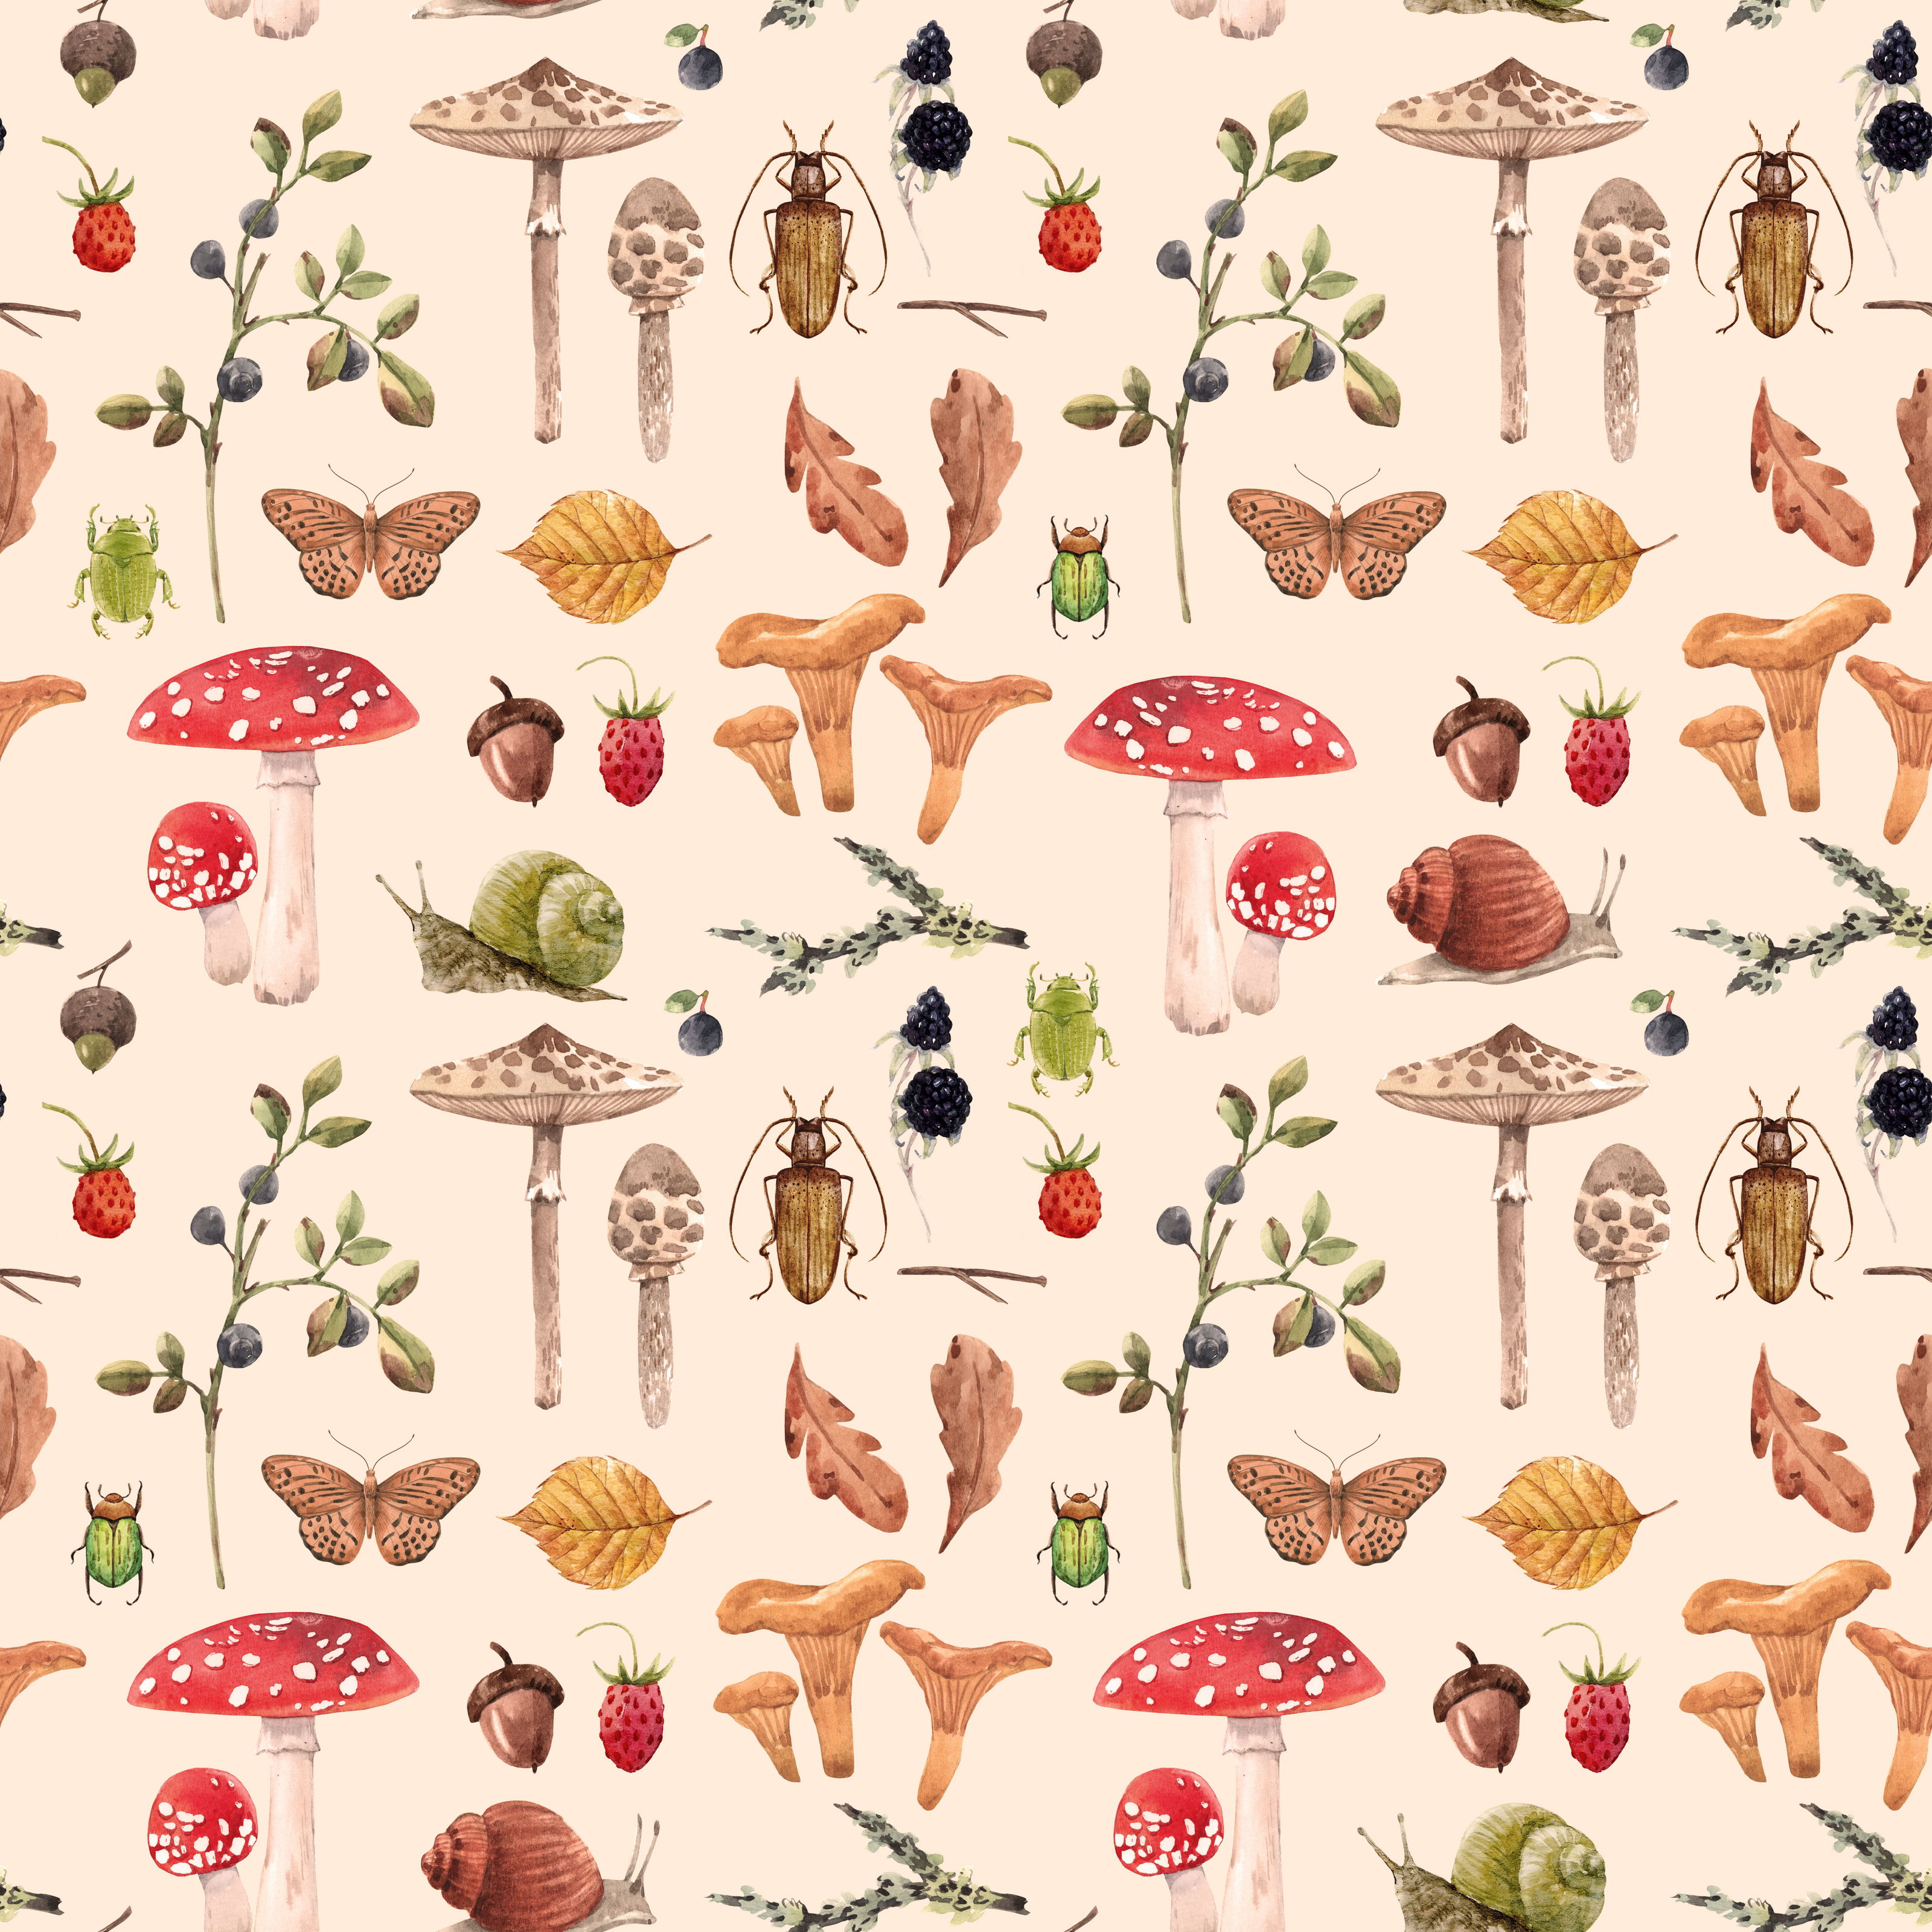 Mushroom Pattern Images  Free Photos PNG Stickers Wallpapers   Backgrounds  rawpixel